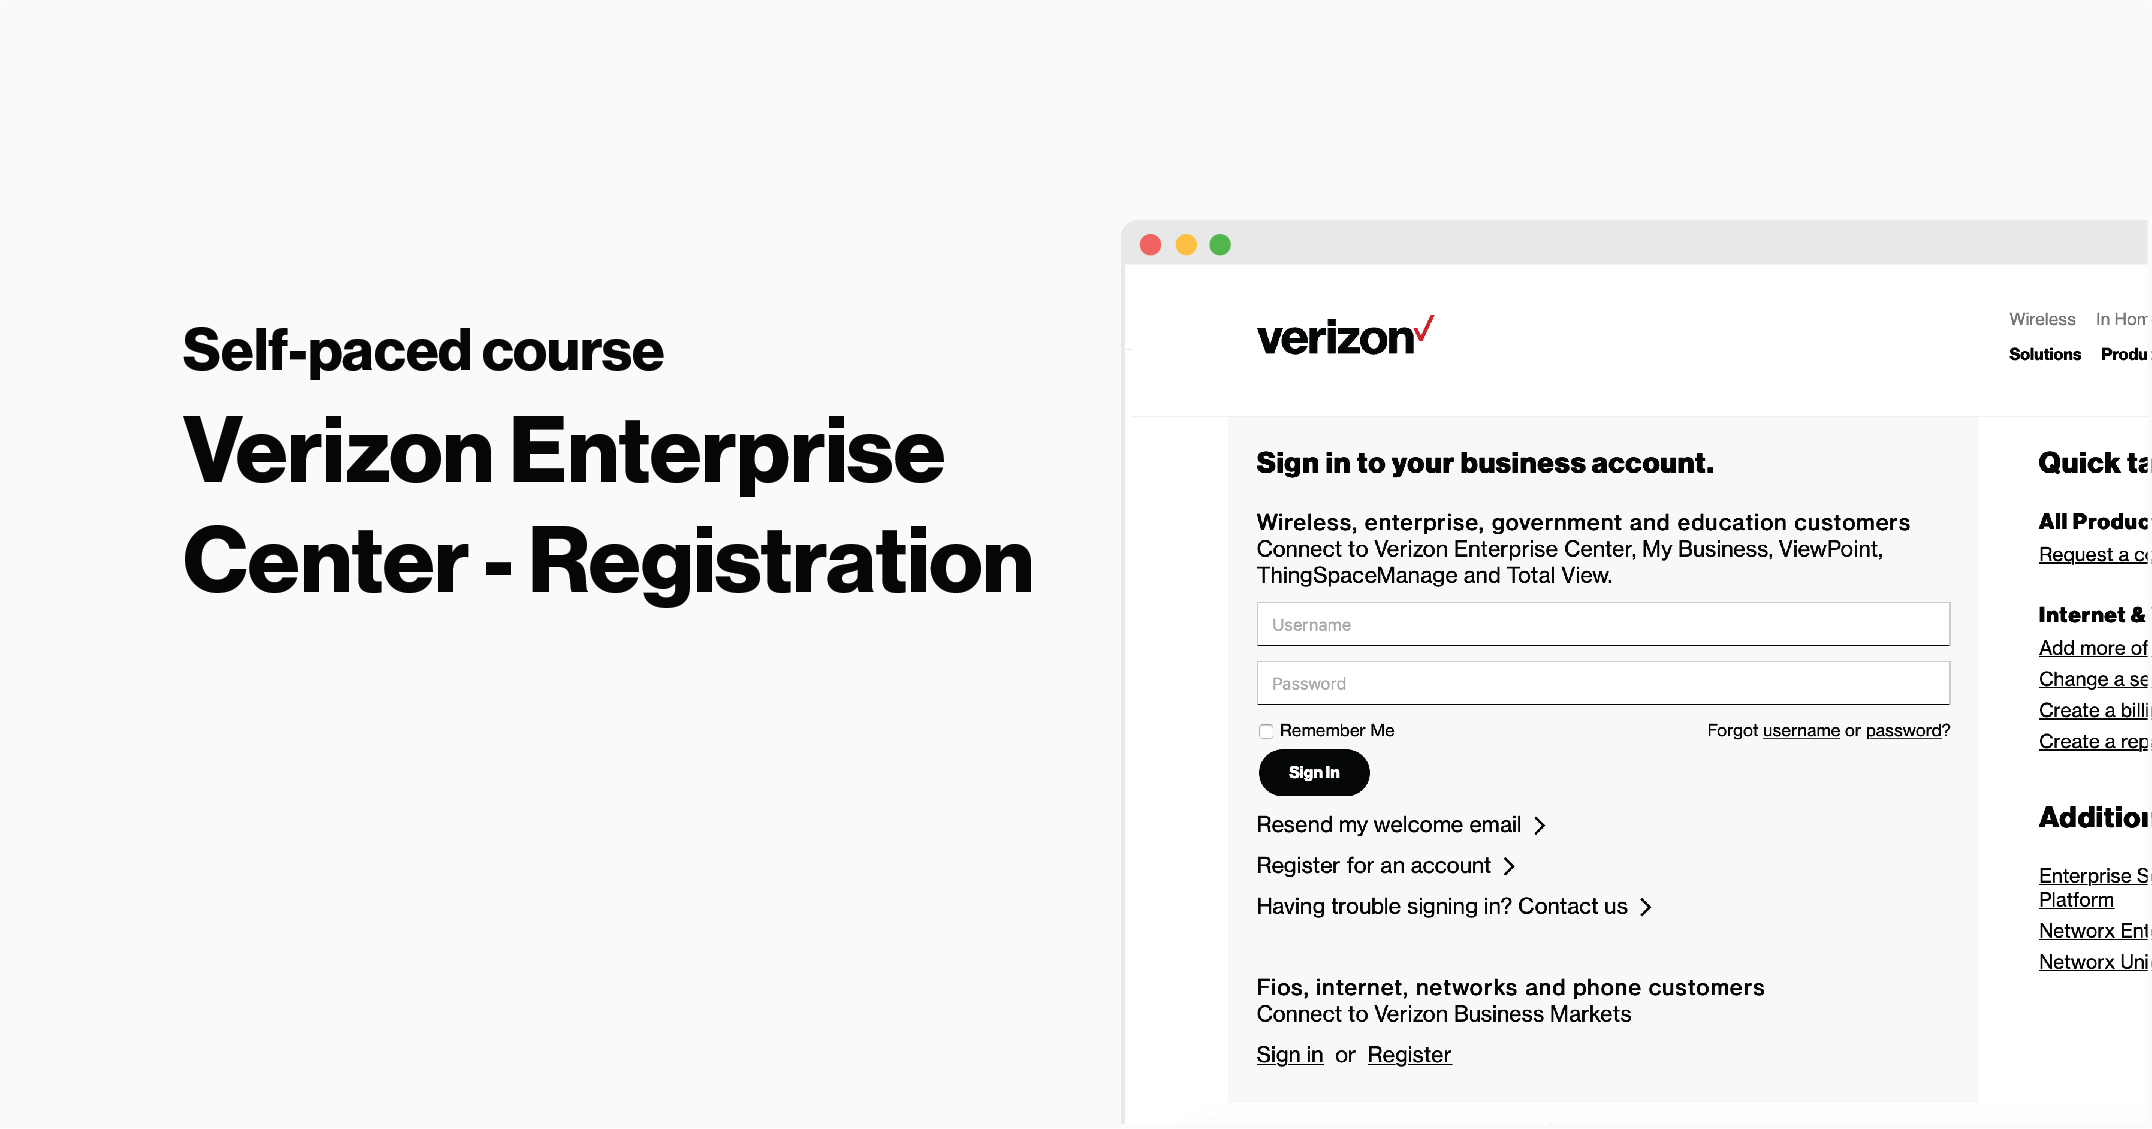 Verizon Frontline Discount - Required documentation and information for registration